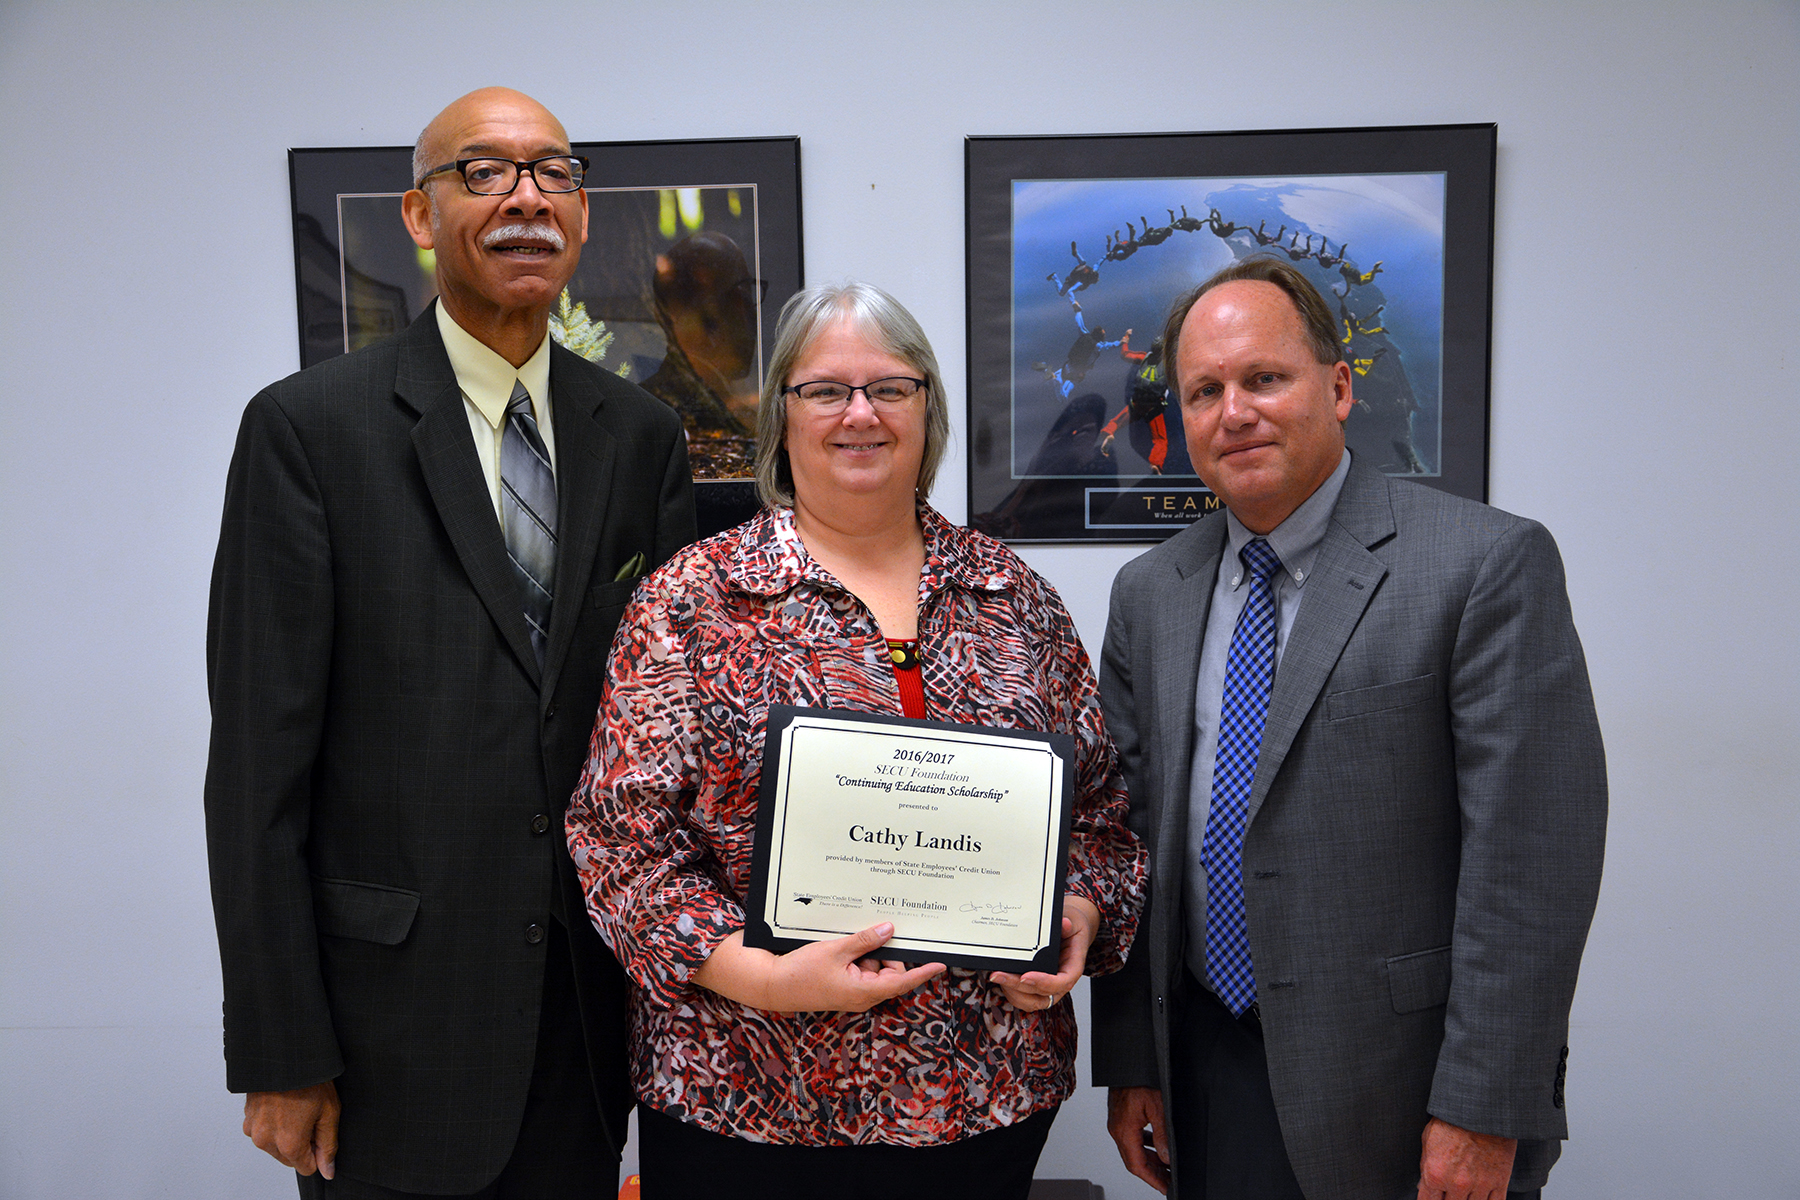 Pictured, from left to right, are Douglas M. Fulford Jr., State Employees Credit Union vice president city executive; Cathy Landis, SECU Continuing Education Scholarship recipient; and Dr. Hal Shuler, associate vice president of Development at Richmond Community College. Not pictured is scholarship recipient Tyrhonda Leak